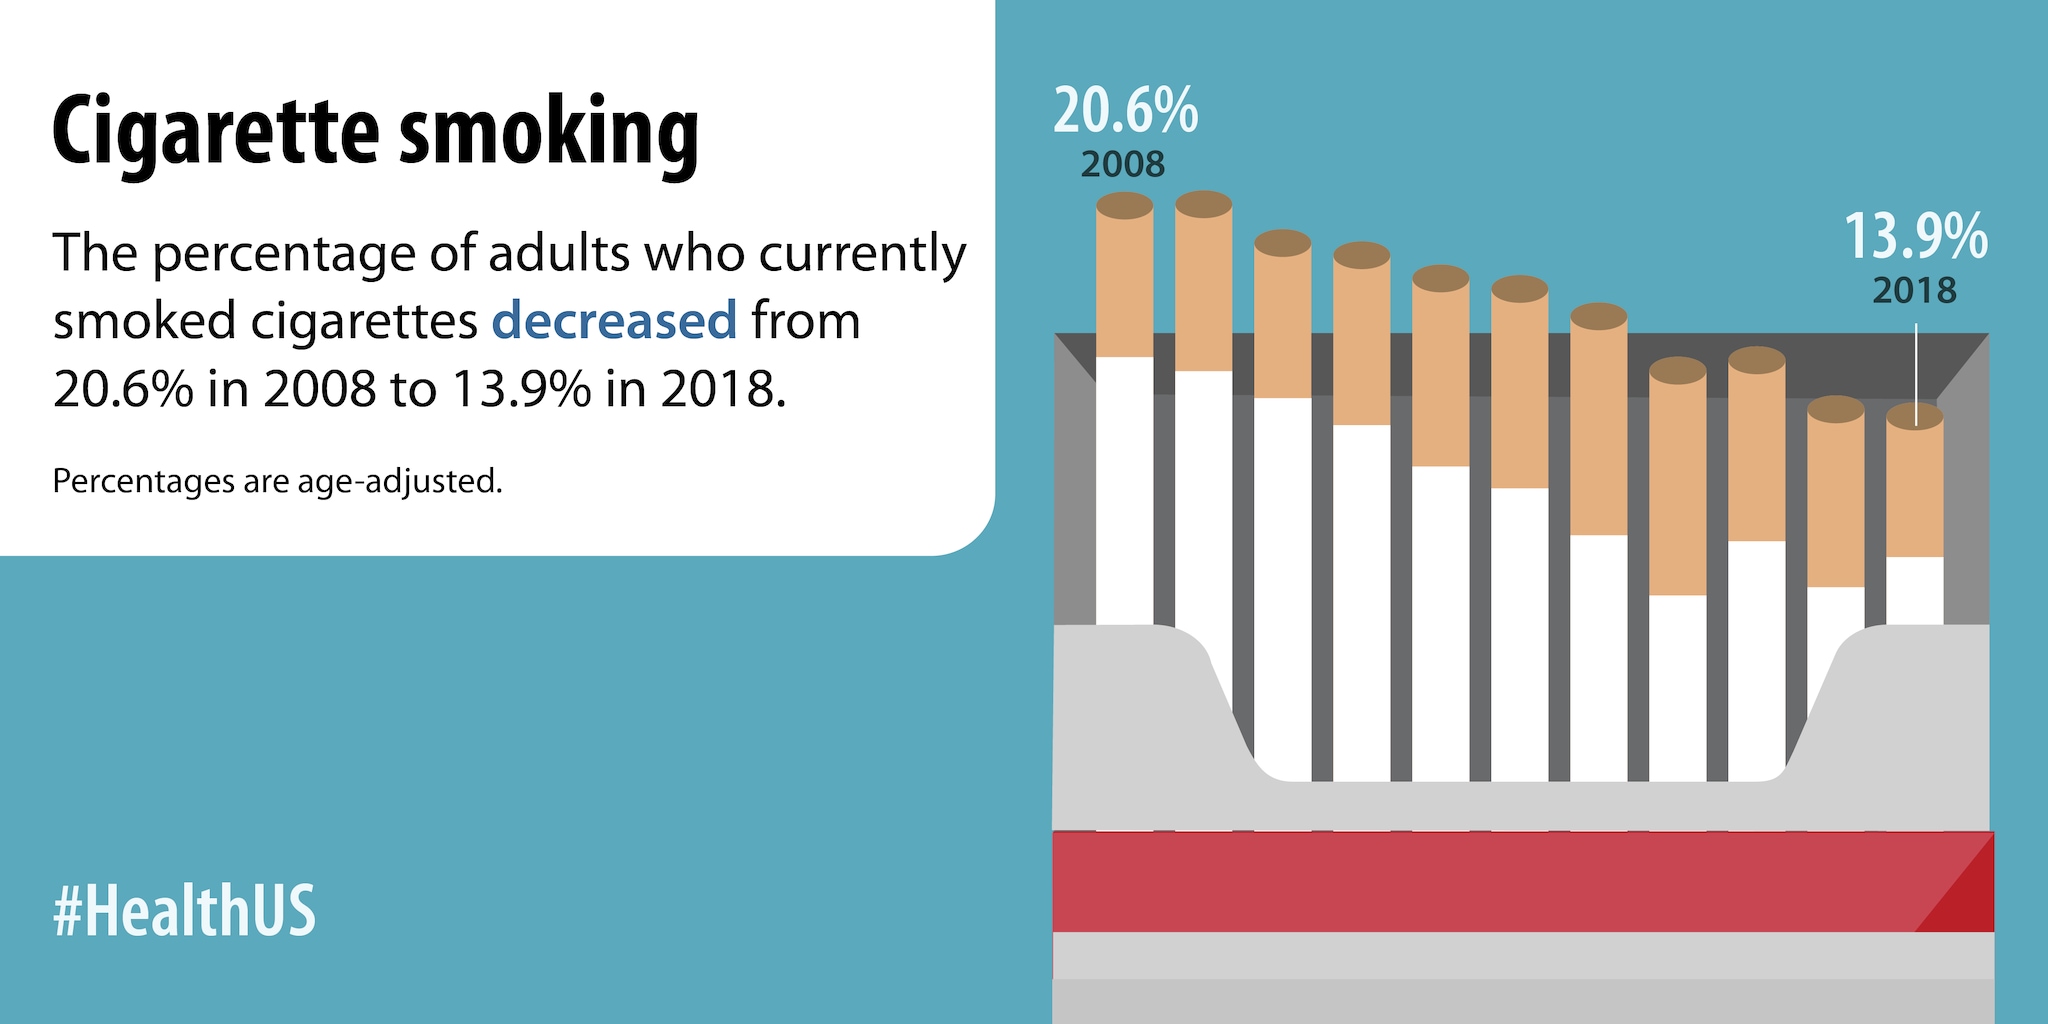 The percentage of adults who currently smoked cigarettes decreased from 20.6% in 2008 to 13.9% in 2018.